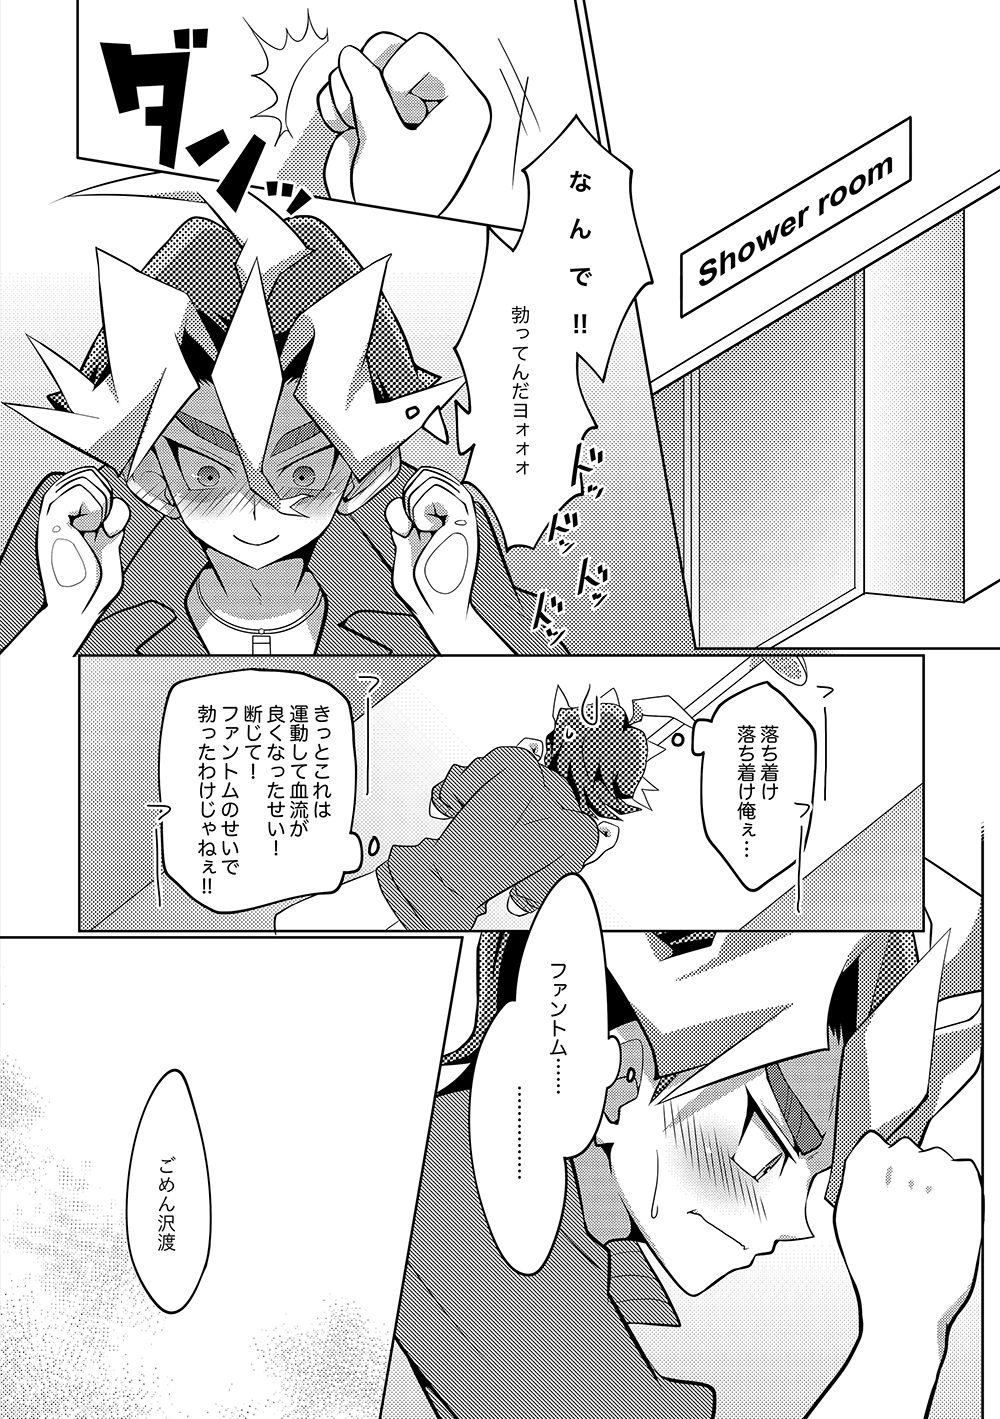 Asstomouth SxS H! ANOTHER - Yu-gi-oh arc-v Sex Tape - Page 7